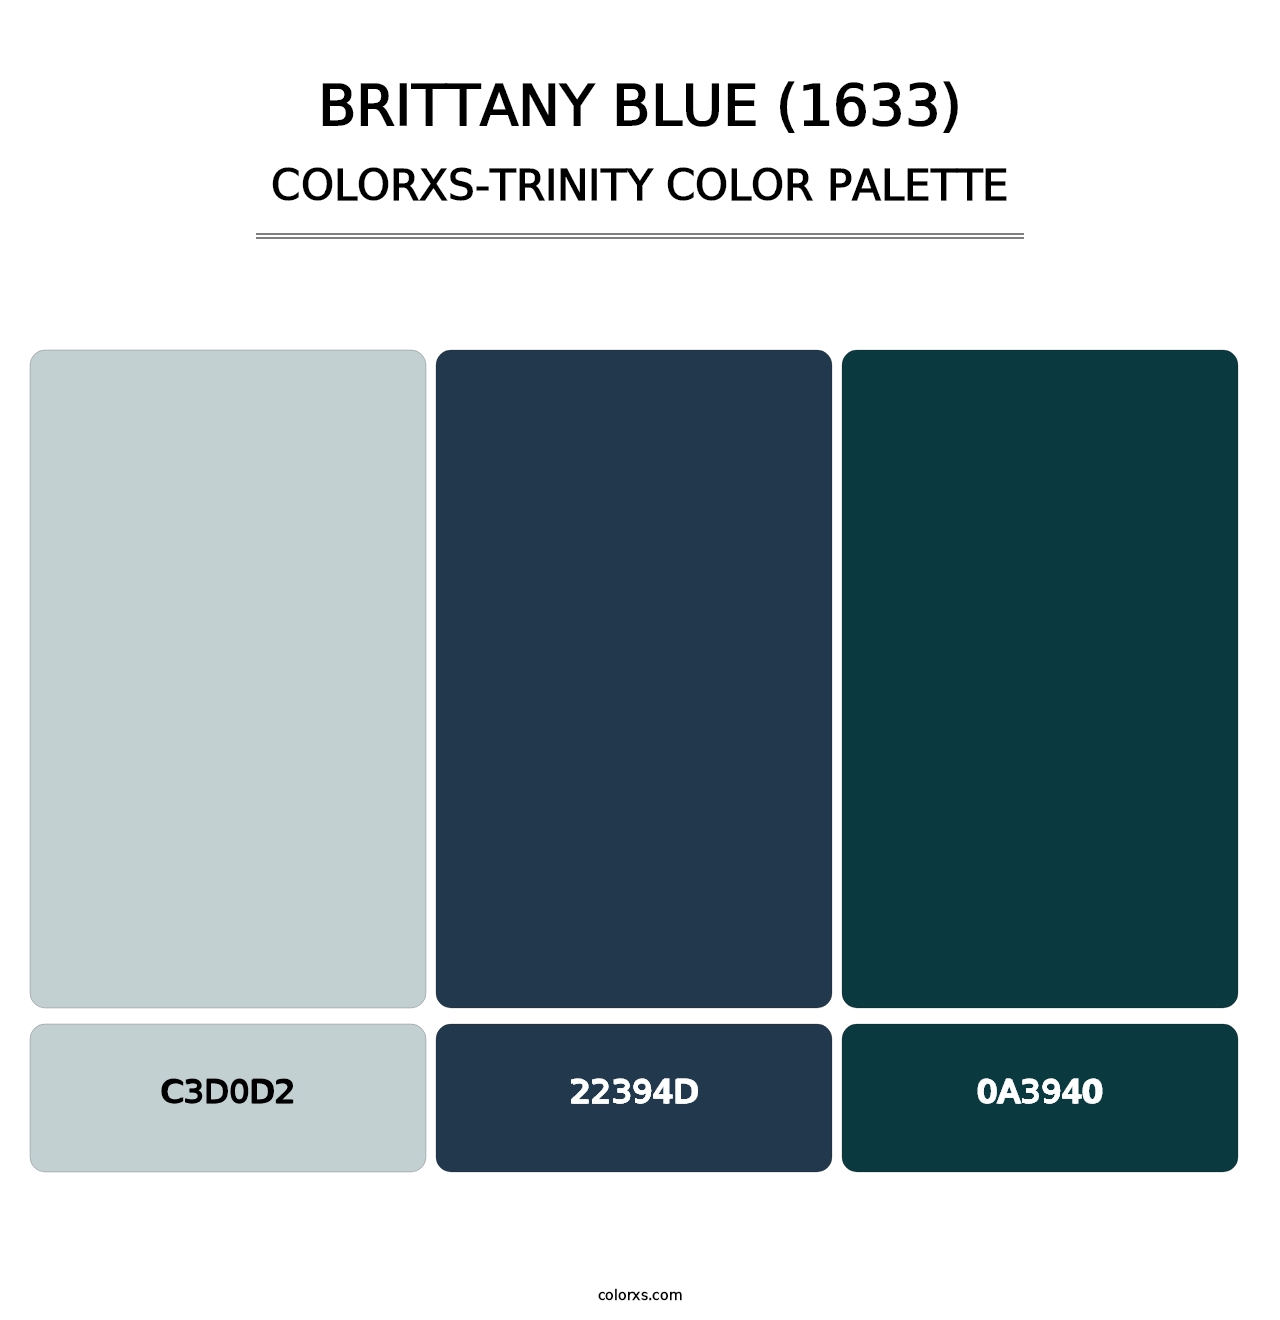 Brittany Blue (1633) - Colorxs Trinity Palette